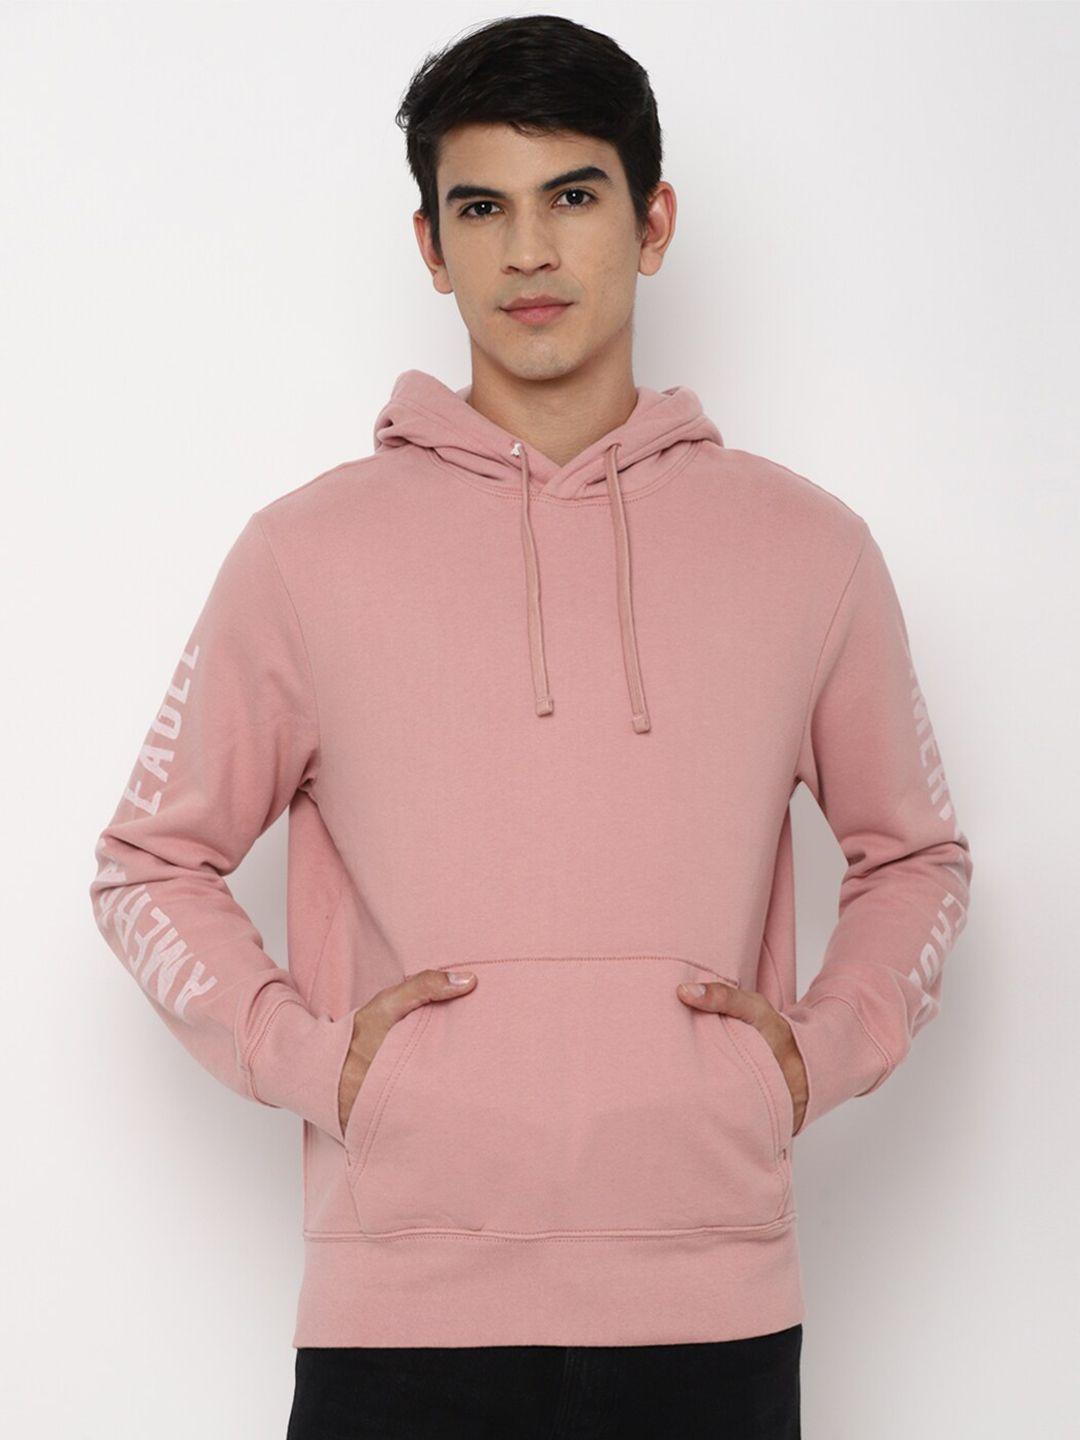 american-eagle-outfitters-men-peach-solid-hooded-sweatshirt